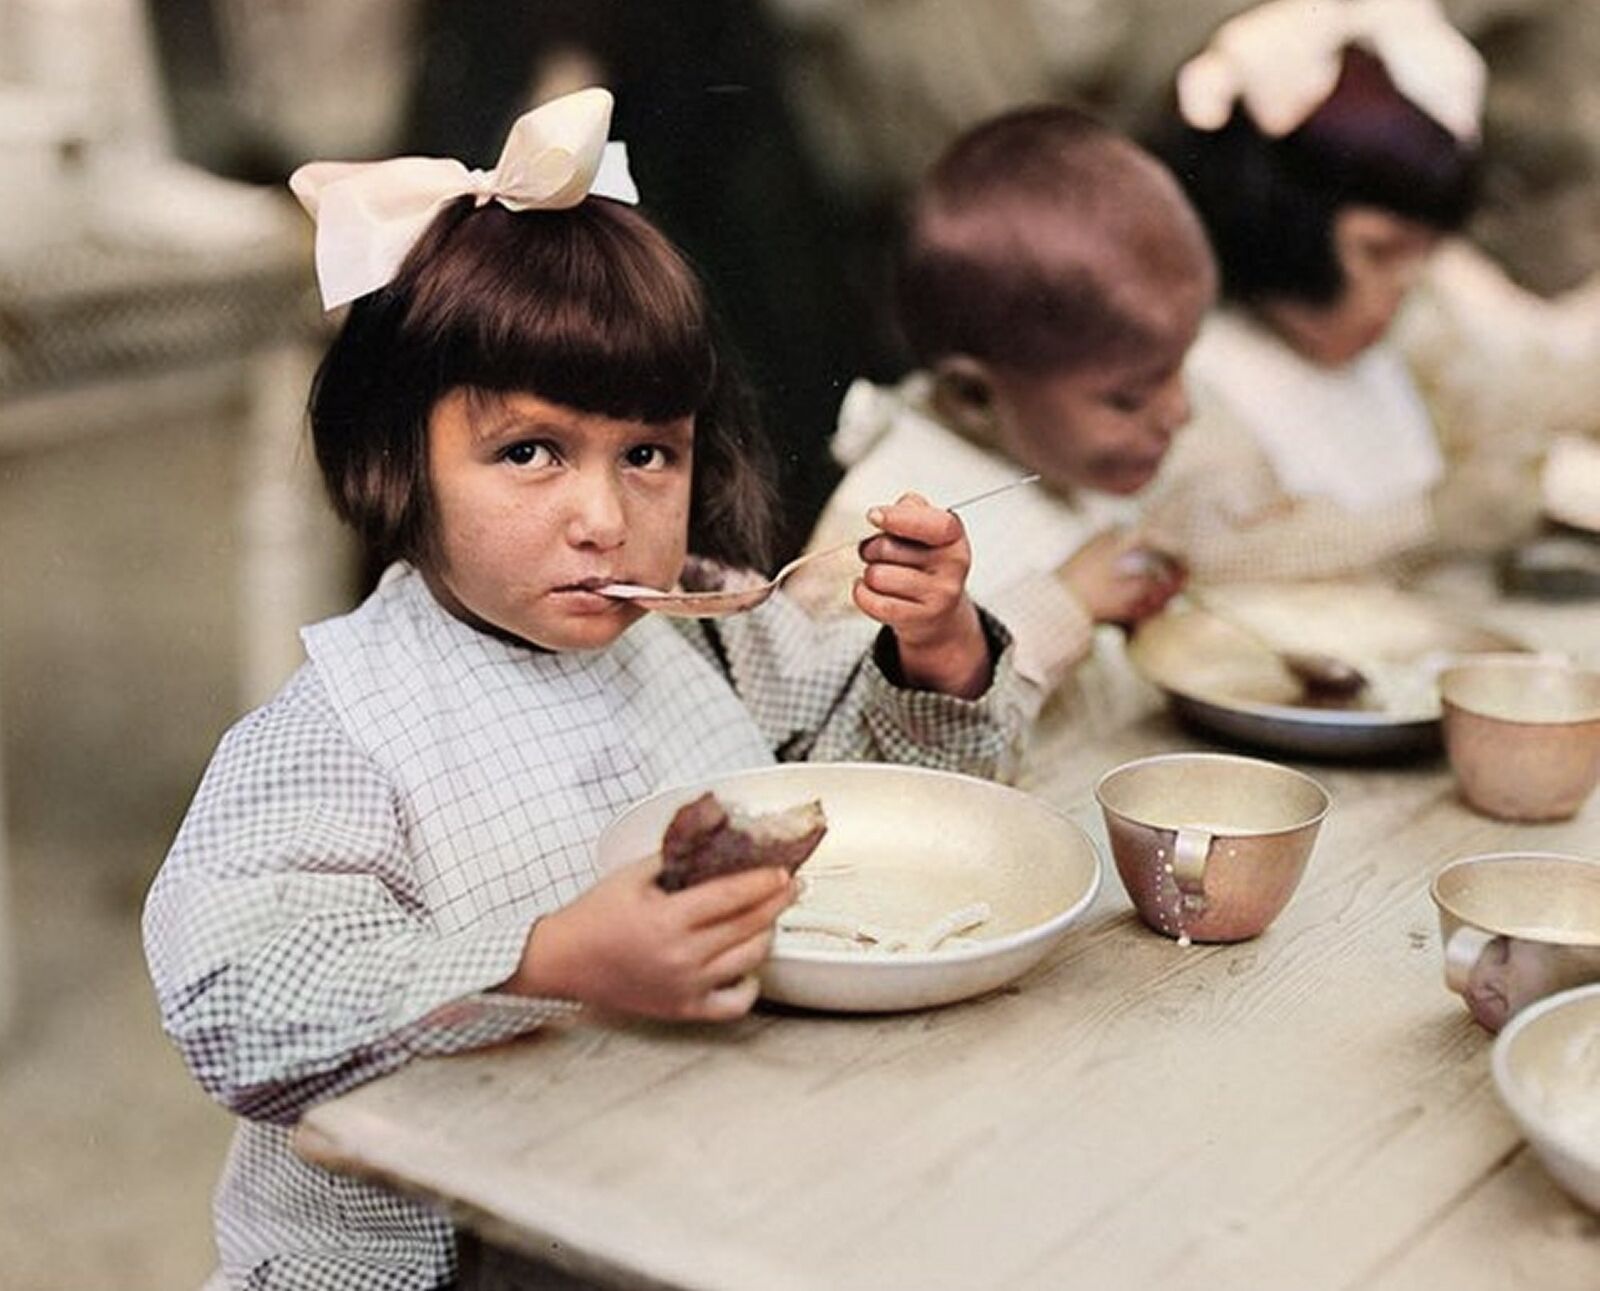 WW1 FRENCH REFUGEE GIRL at MEAL TIME Borderless 8X10 Photo